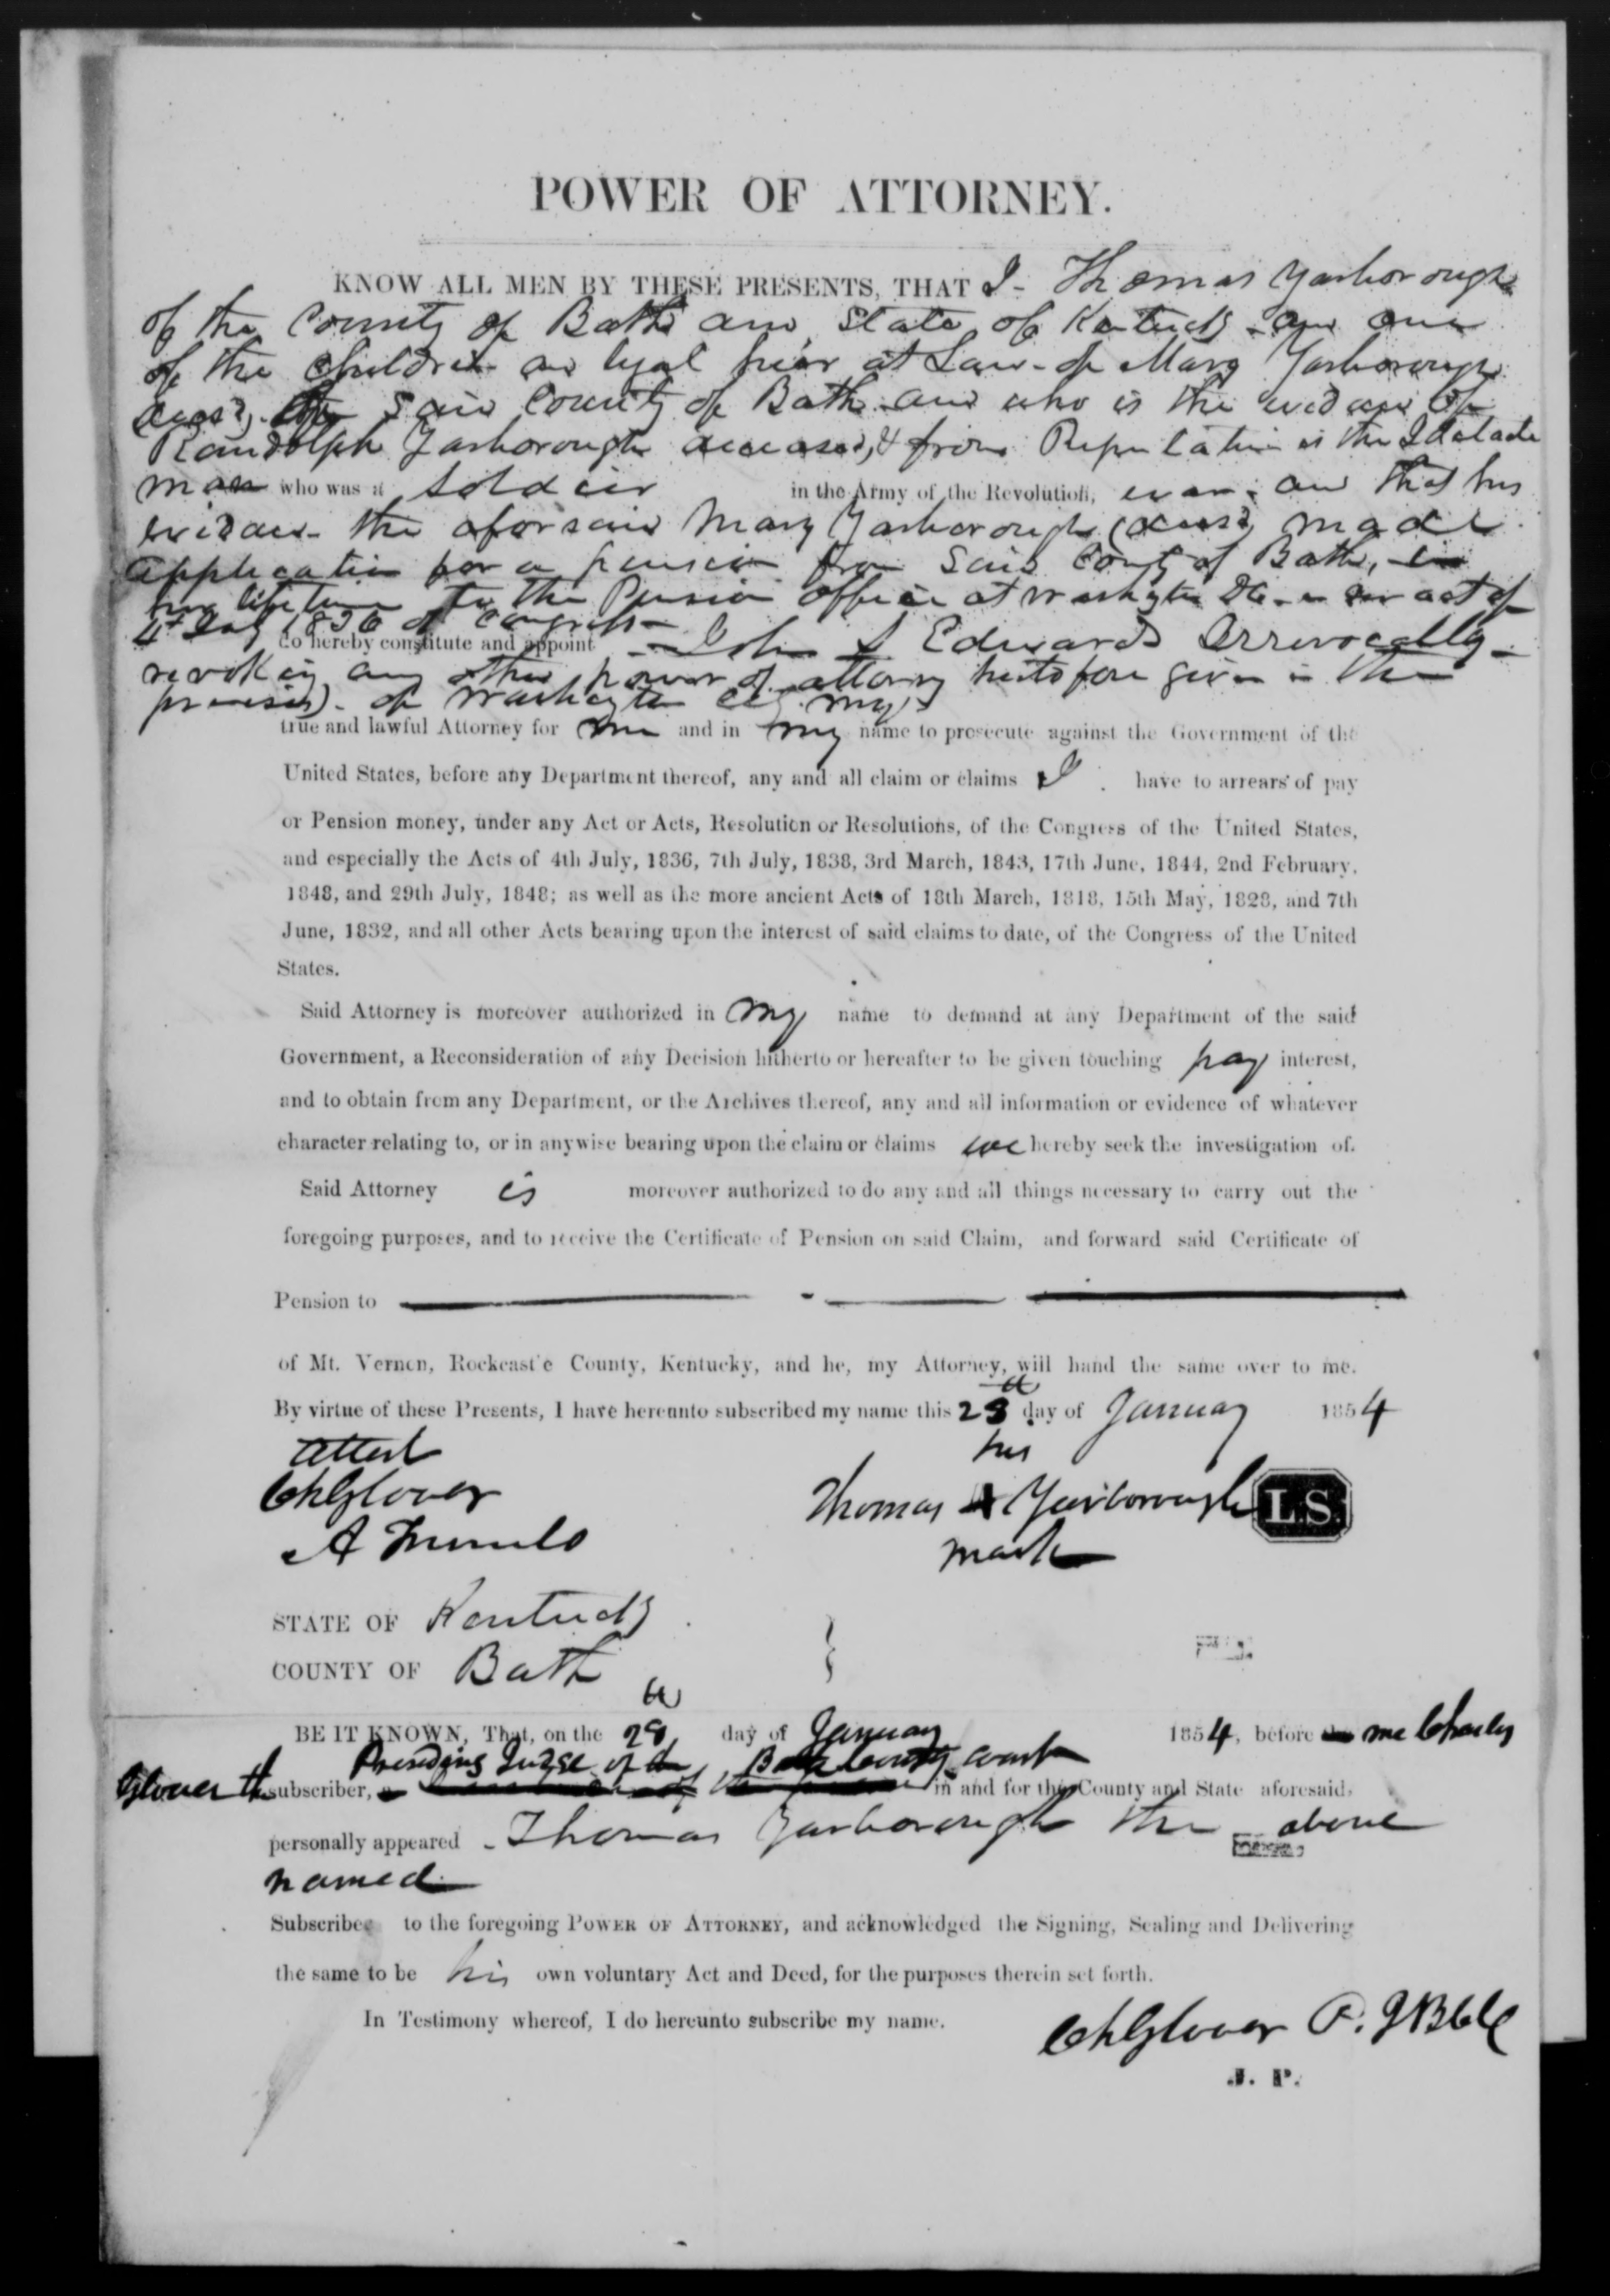 Appointment of John S. Edwards as Thomas Yarborough's Power of Attorney, 28 January 1854, page 1